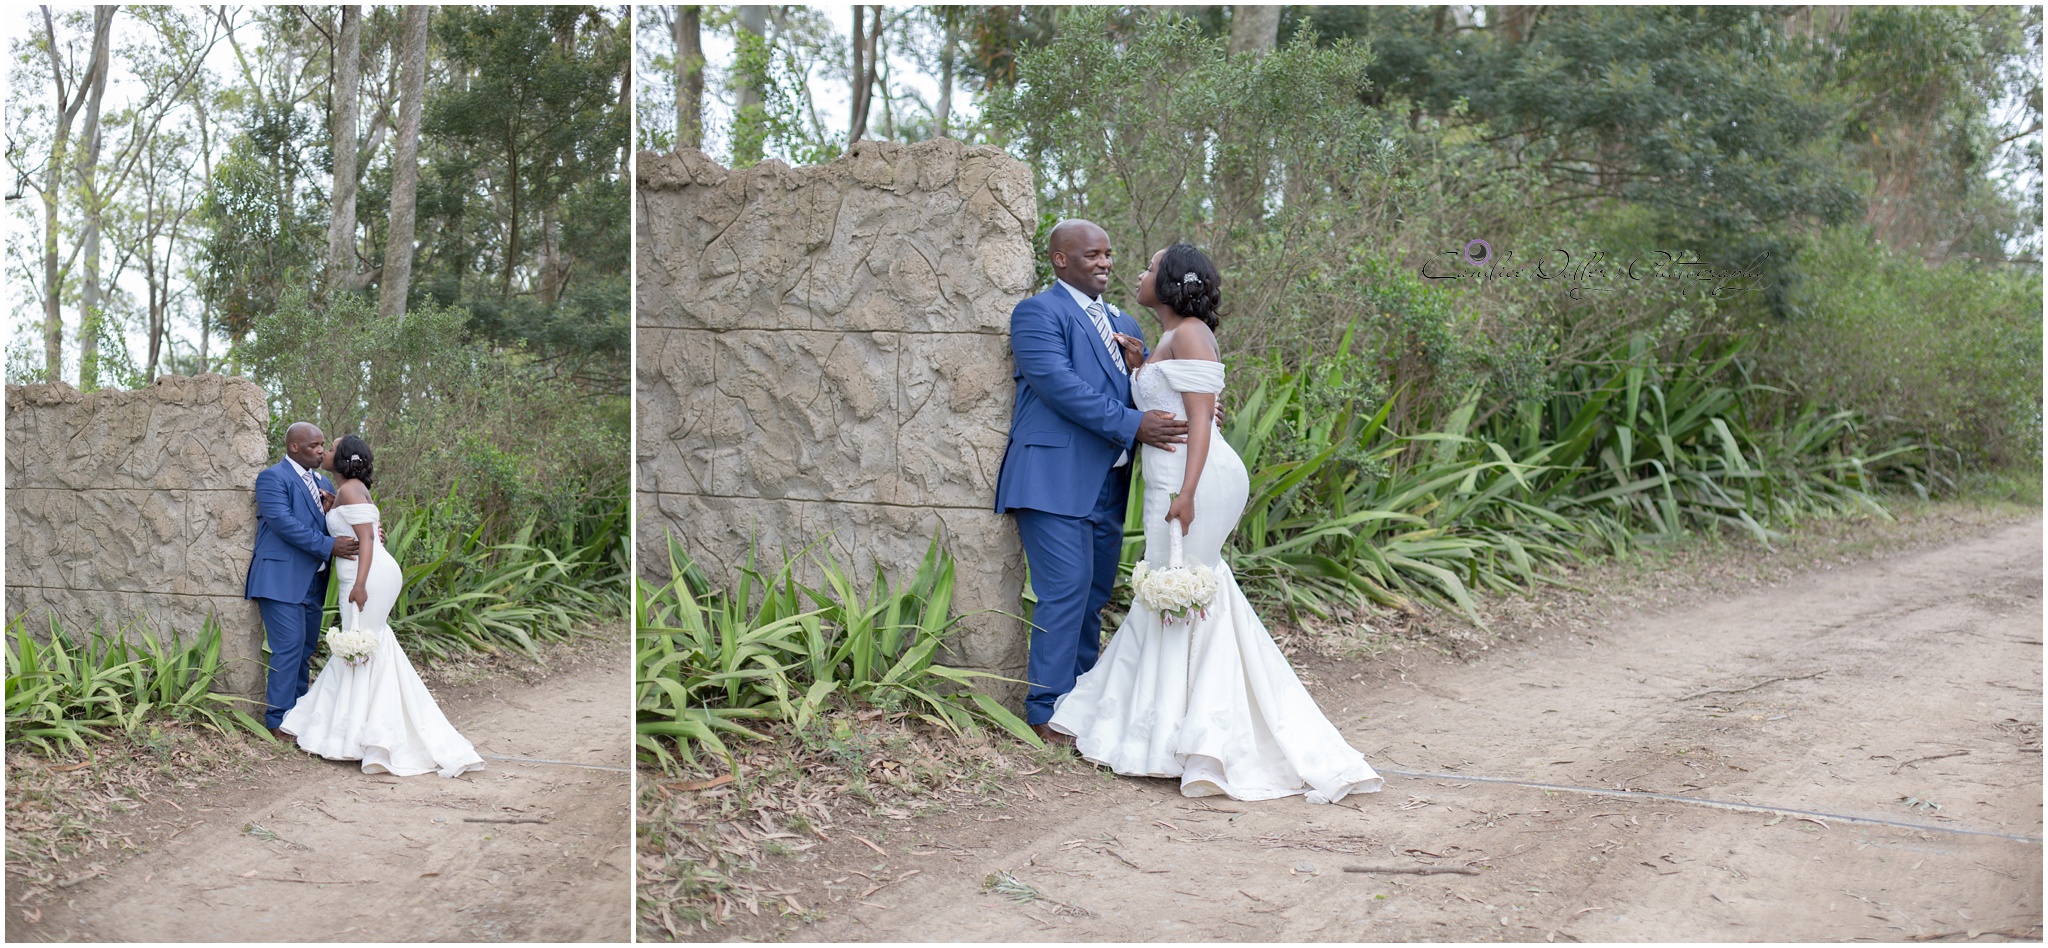 Thembi & Sabelo's Wedding - Candice Dollery Photography_8317